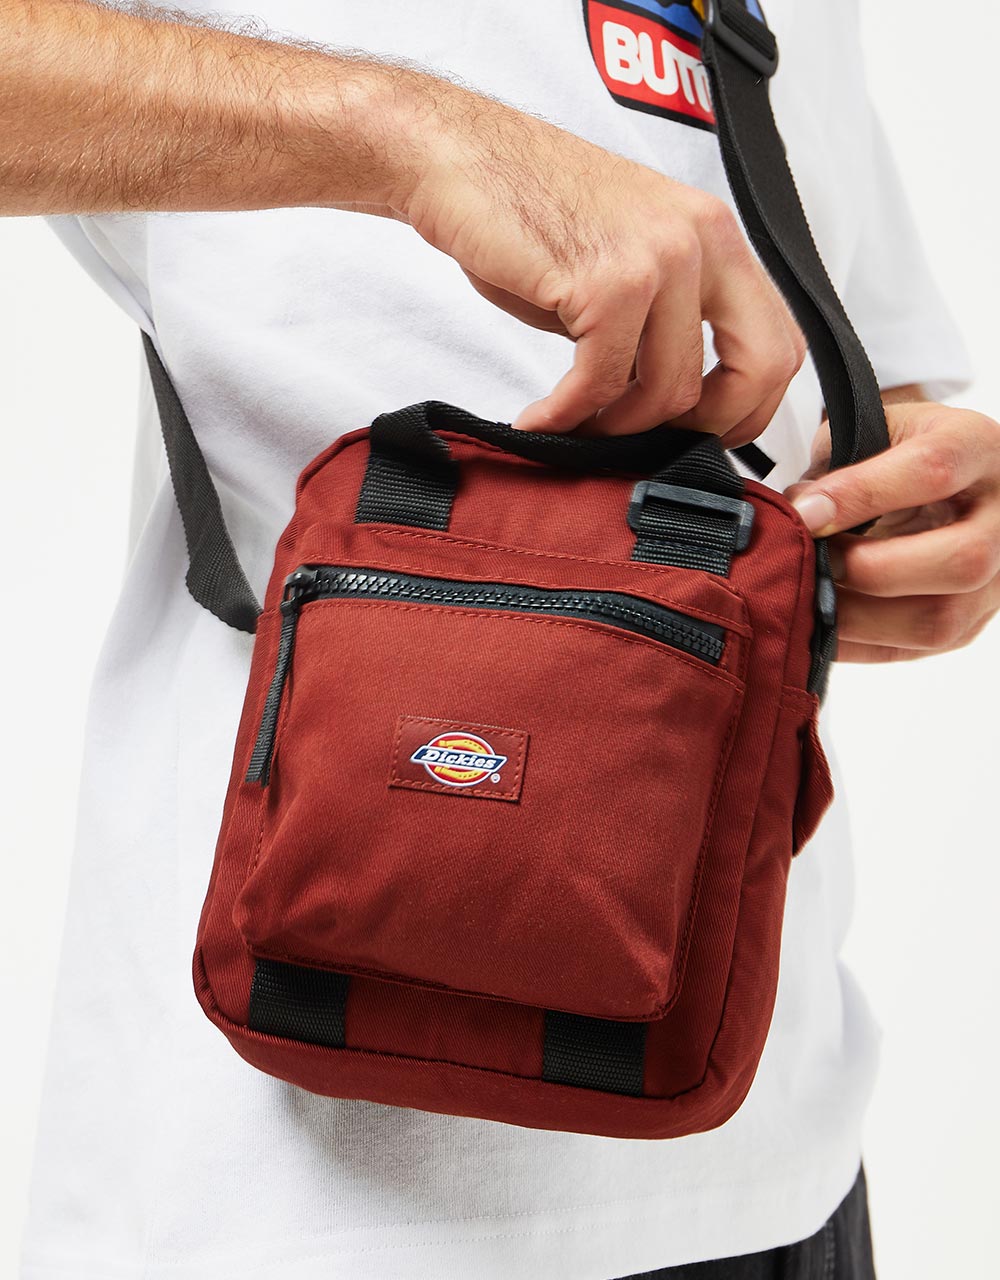 Dickies Moreauville Cross Body Bag - Fired Brick